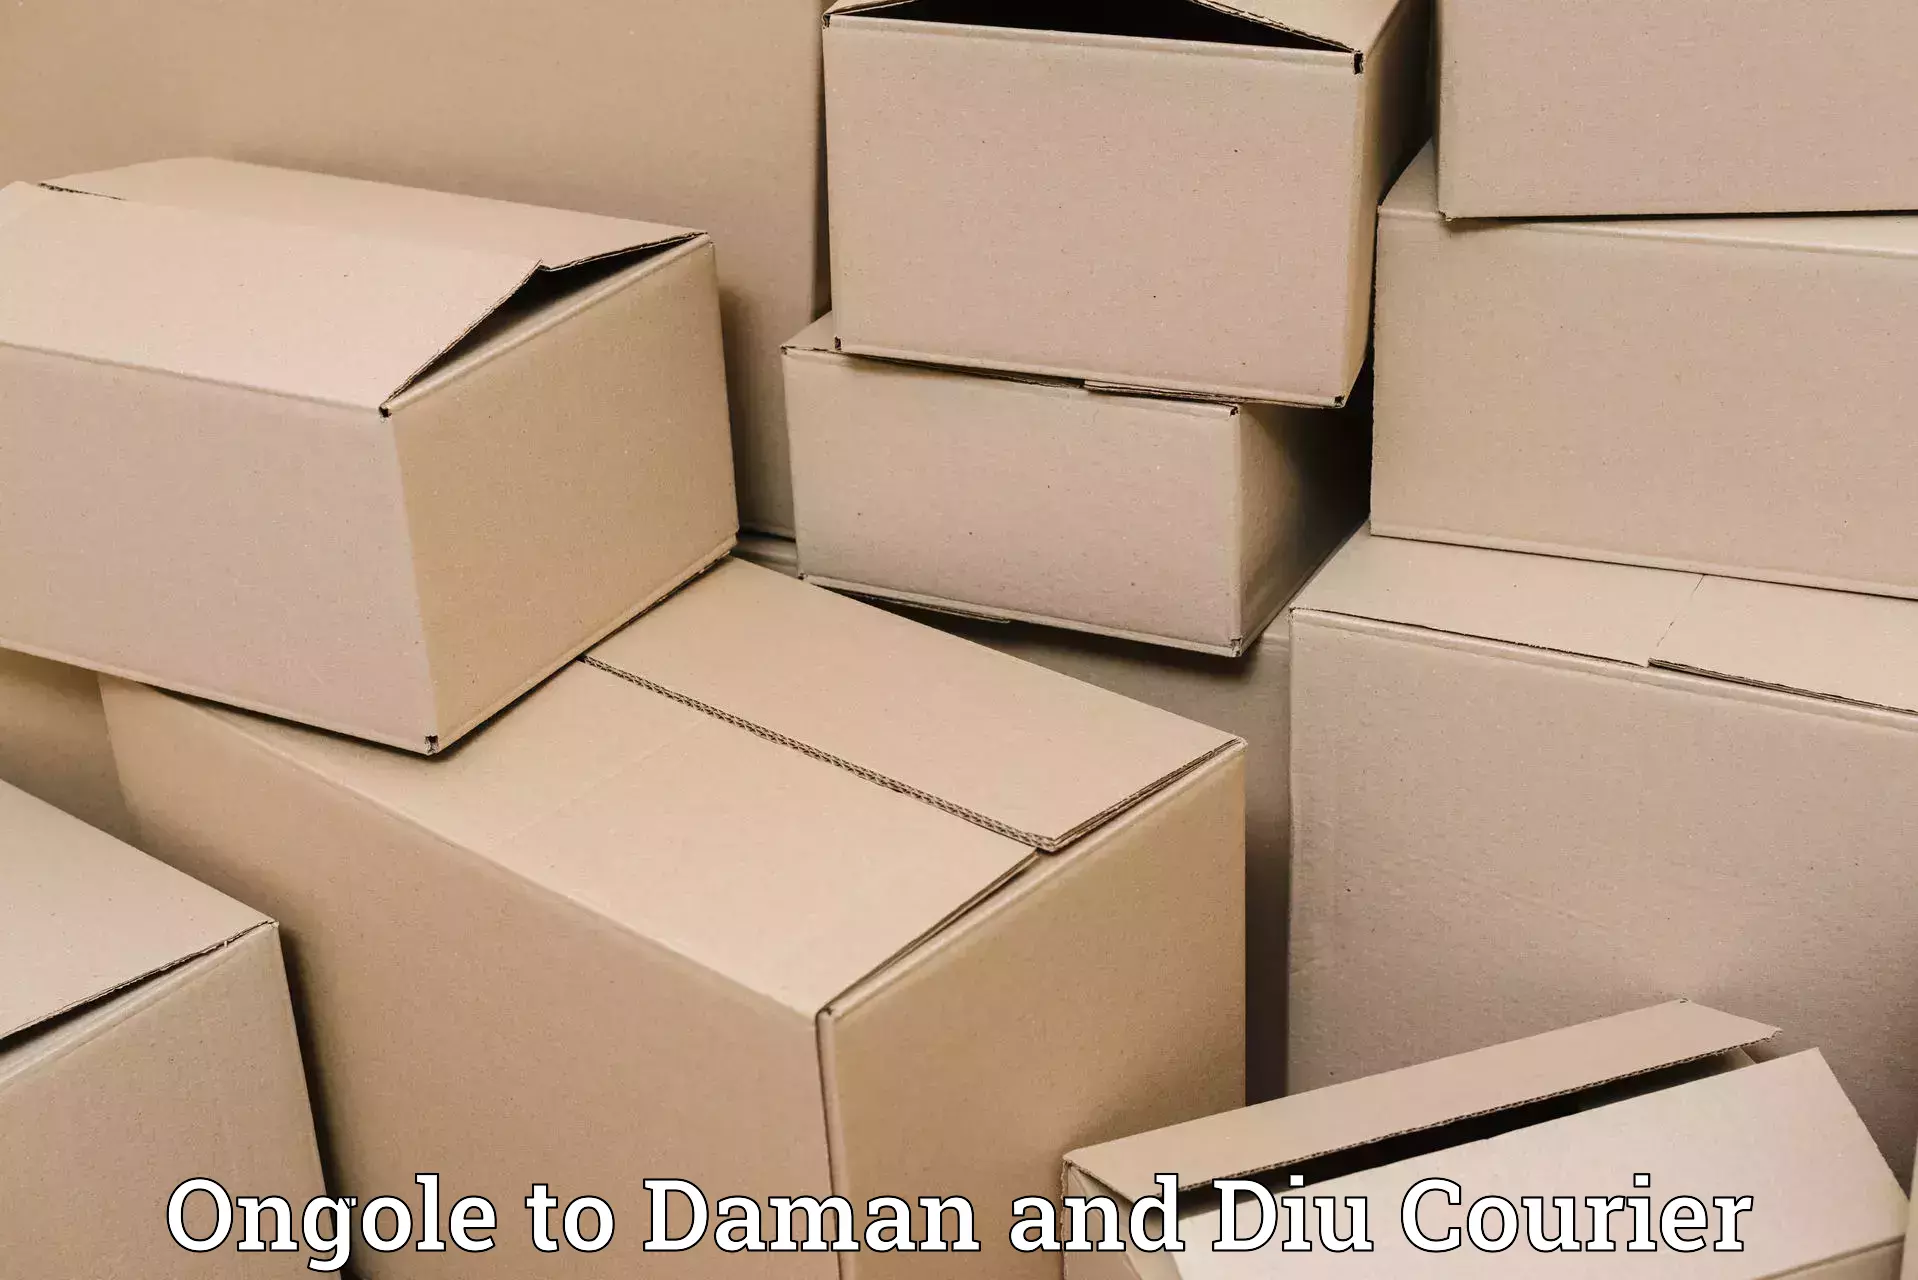 Efficient parcel tracking Ongole to Daman and Diu